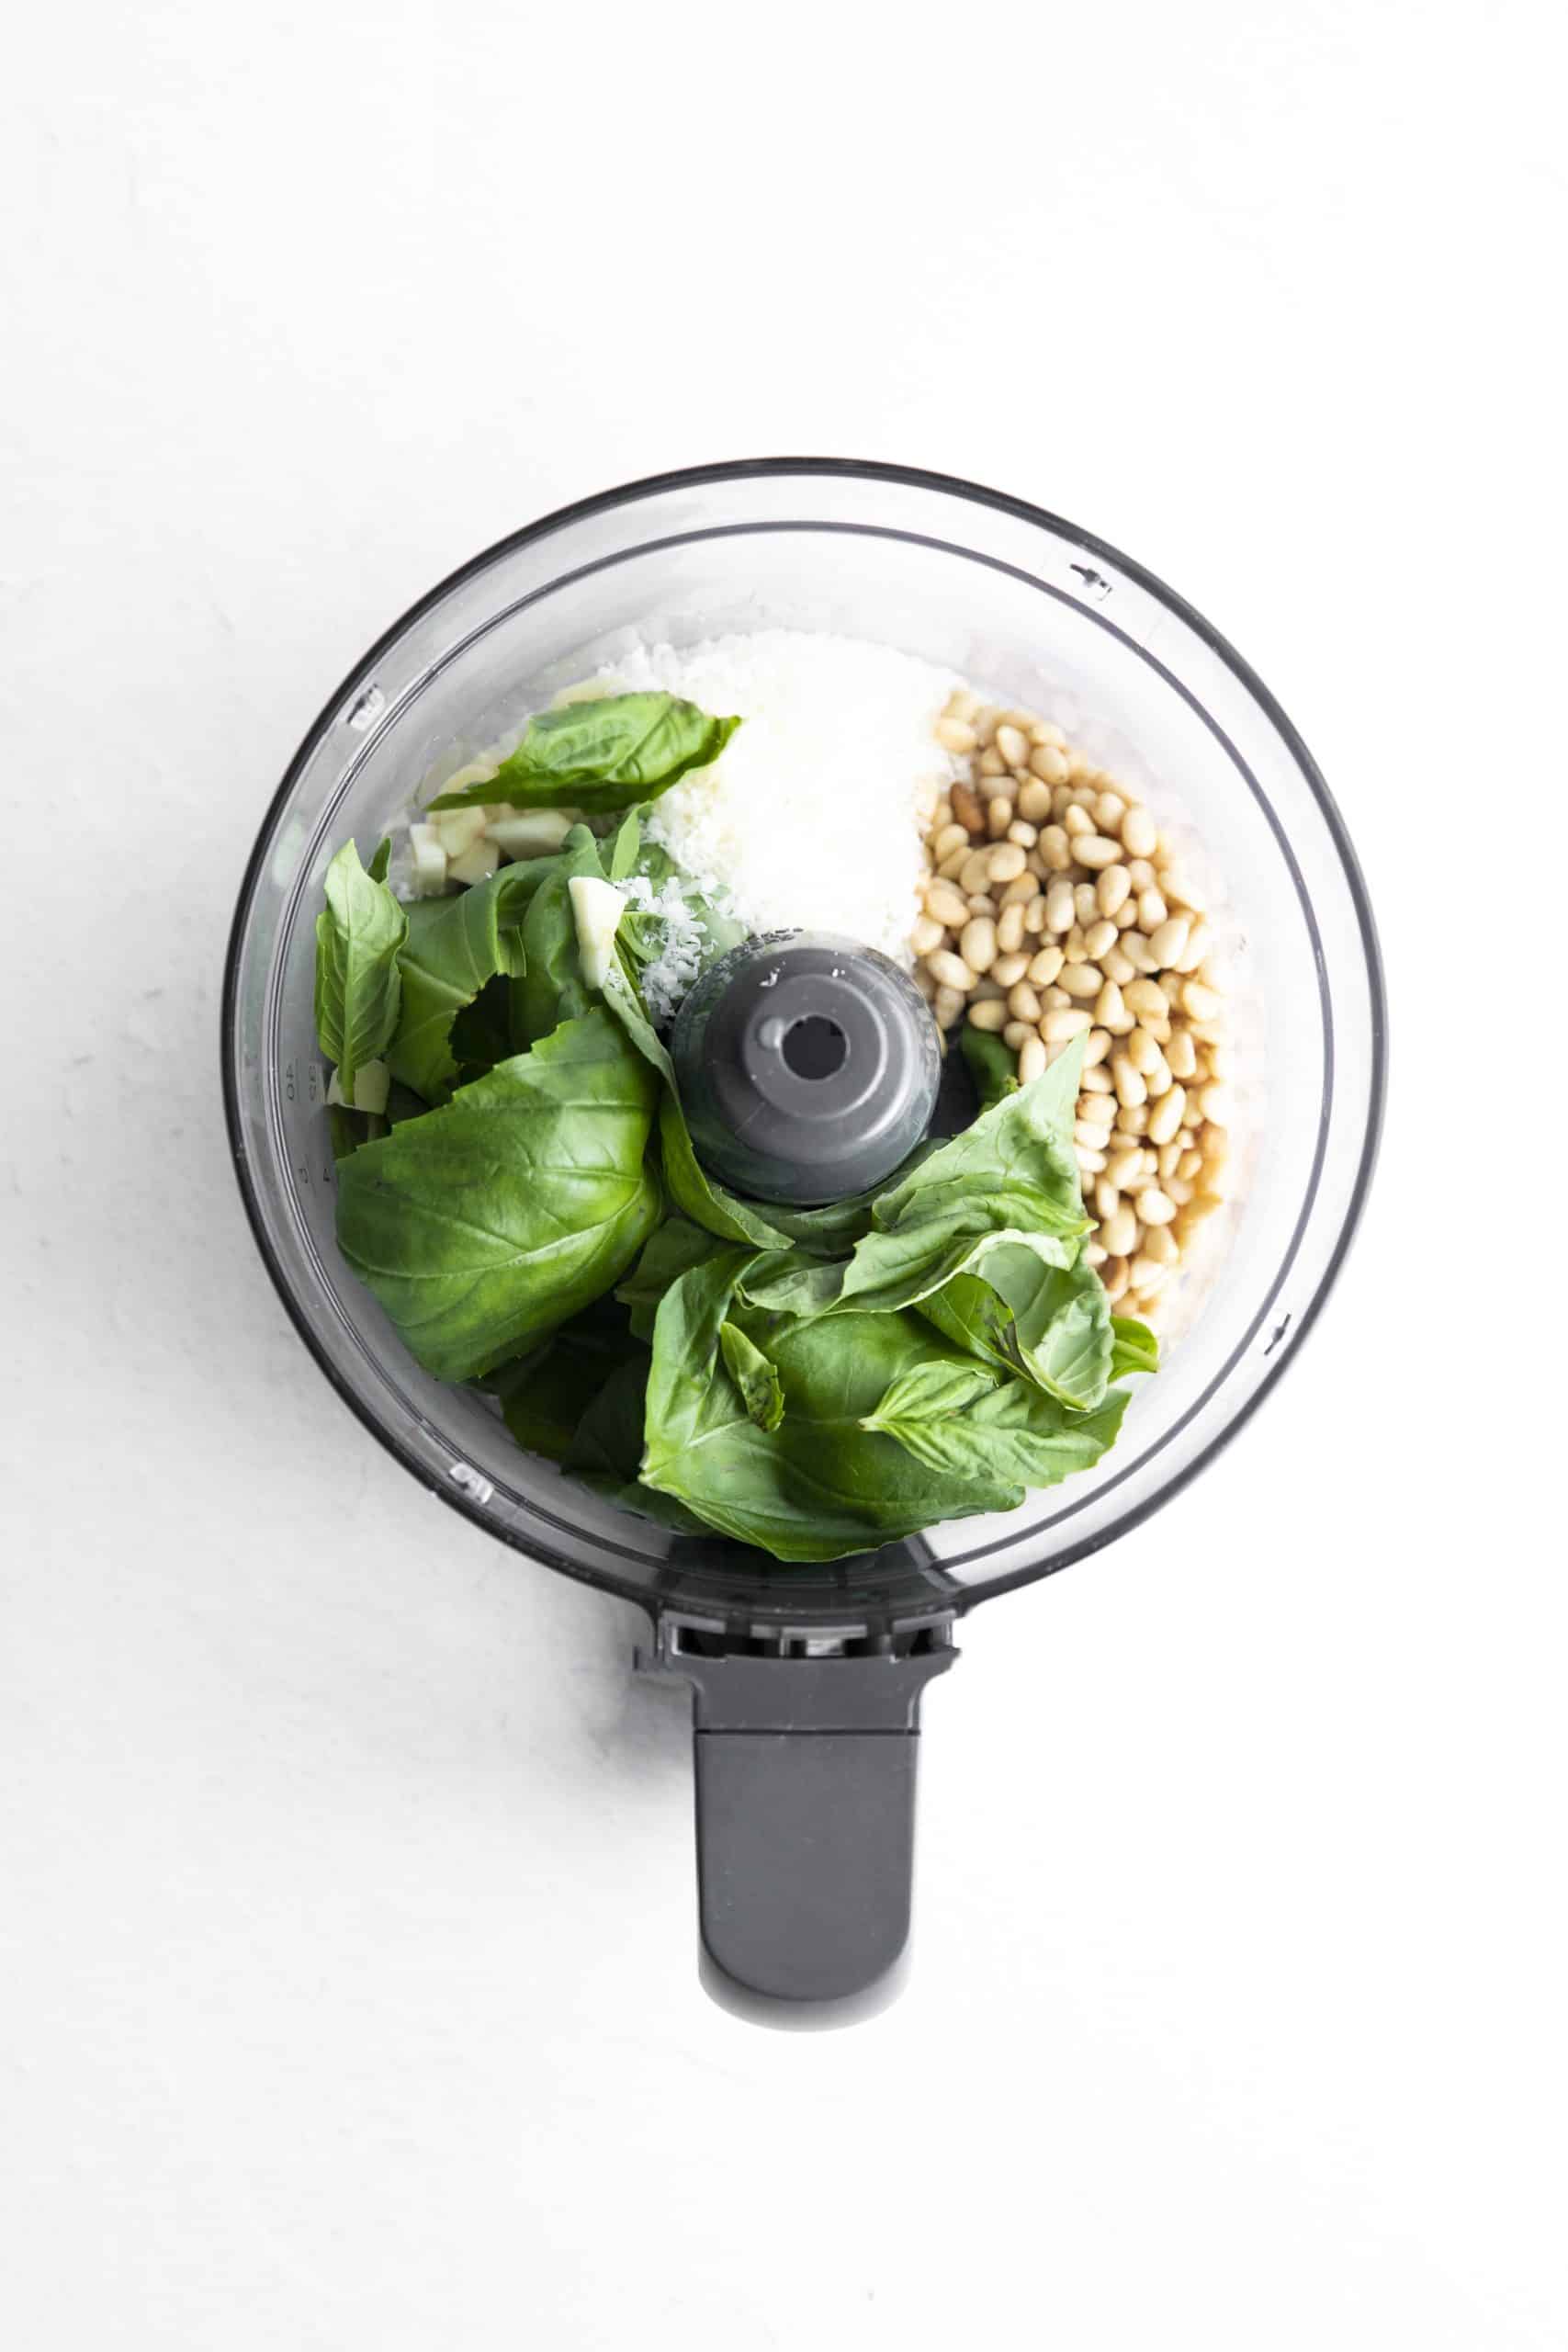 basil, pinenuts, and cheese in a food processor